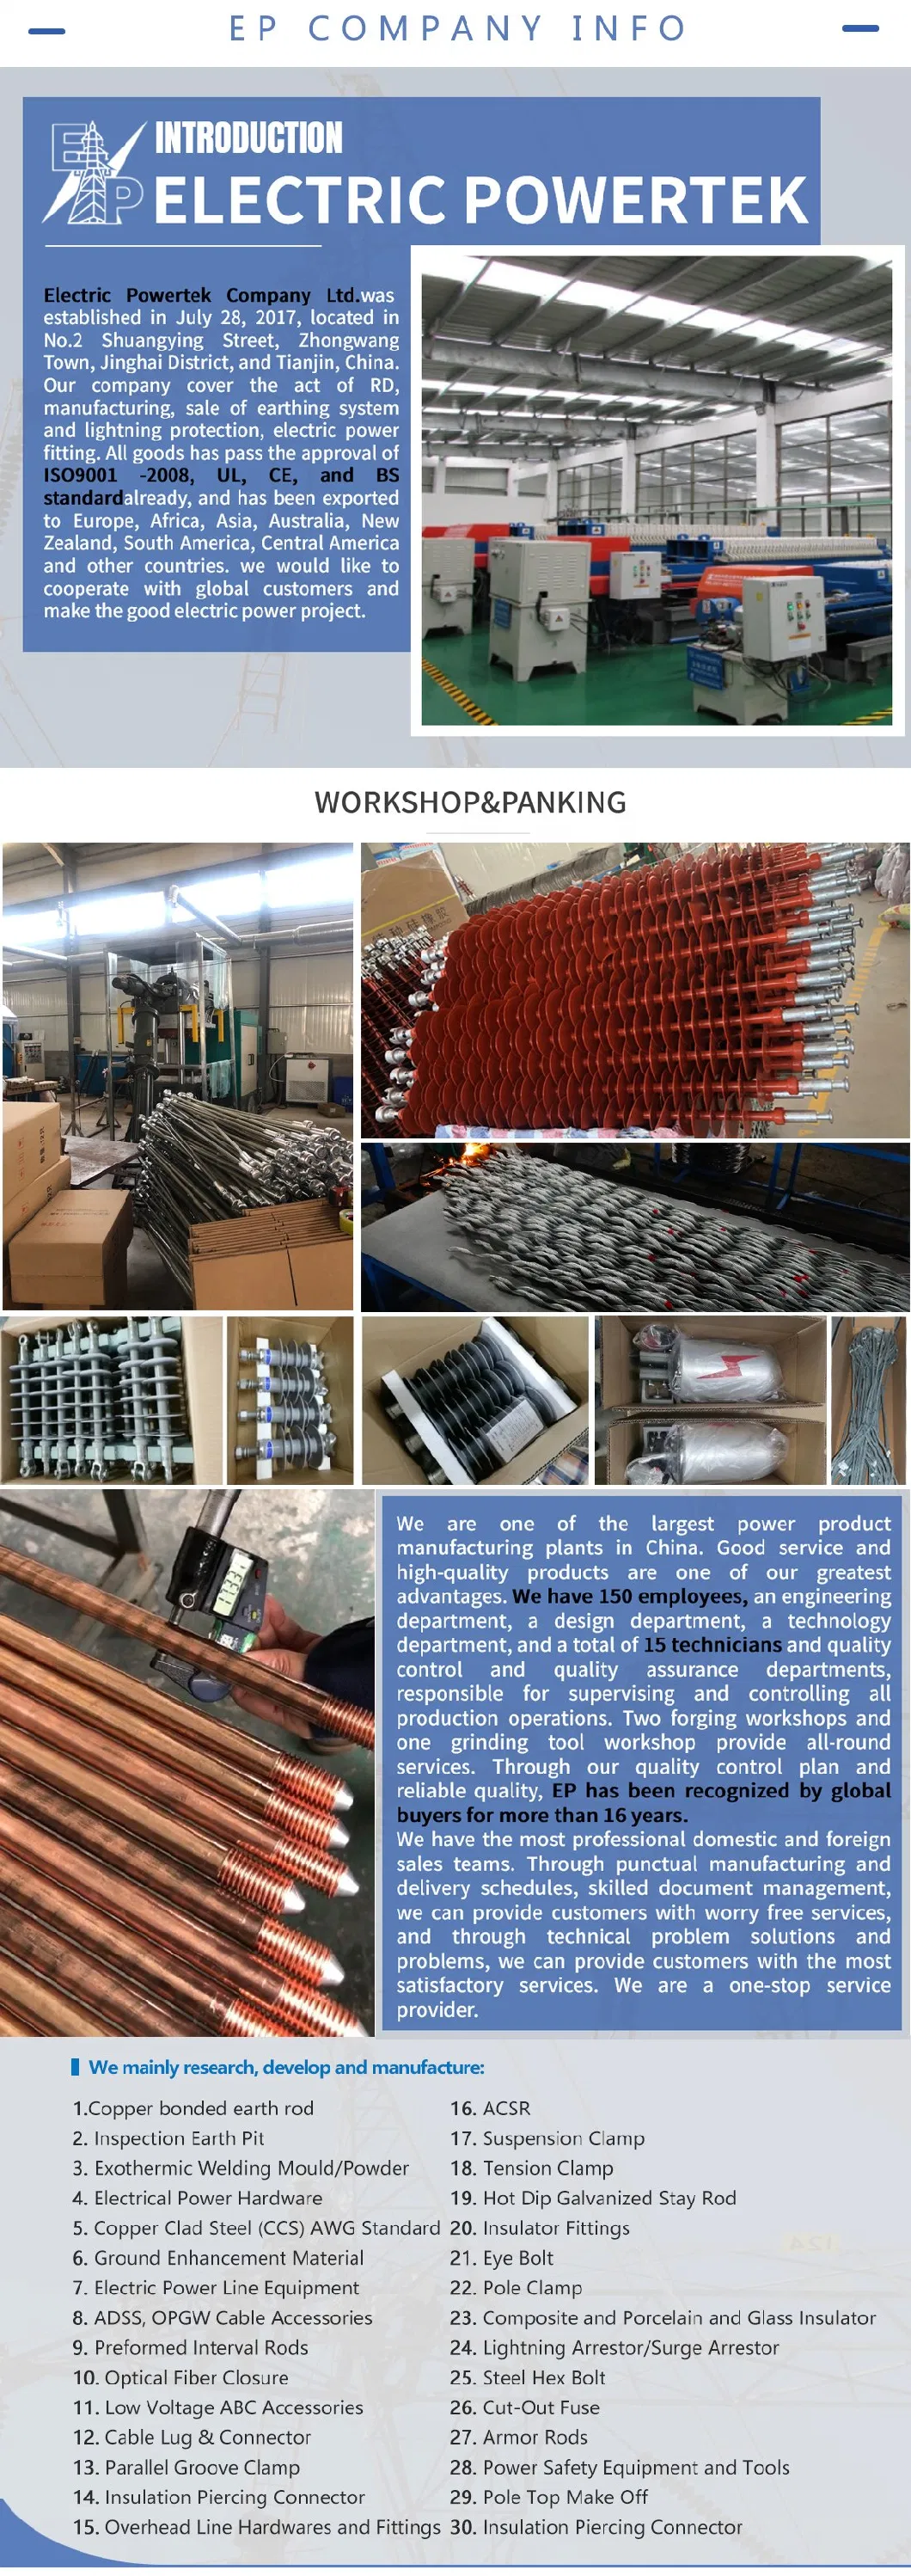 Copper Bonded Earth Rod Price Copperweld Clad Steel Ground Copper Rod Price for Earthing System